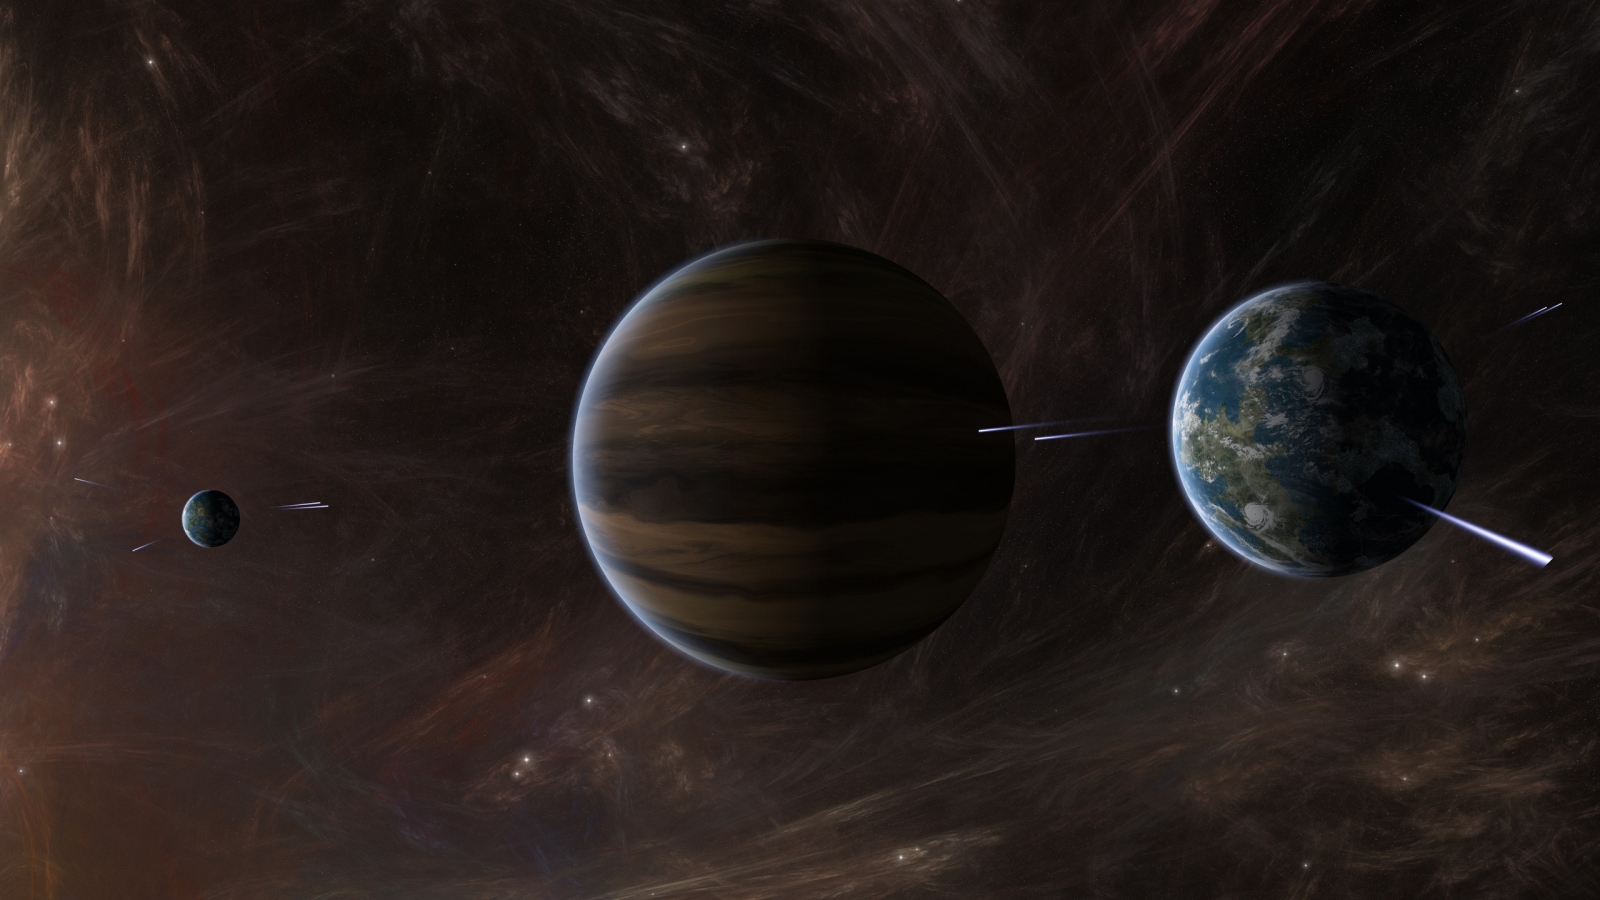 Space Planets Activity for 1600 x 900 HDTV resolution